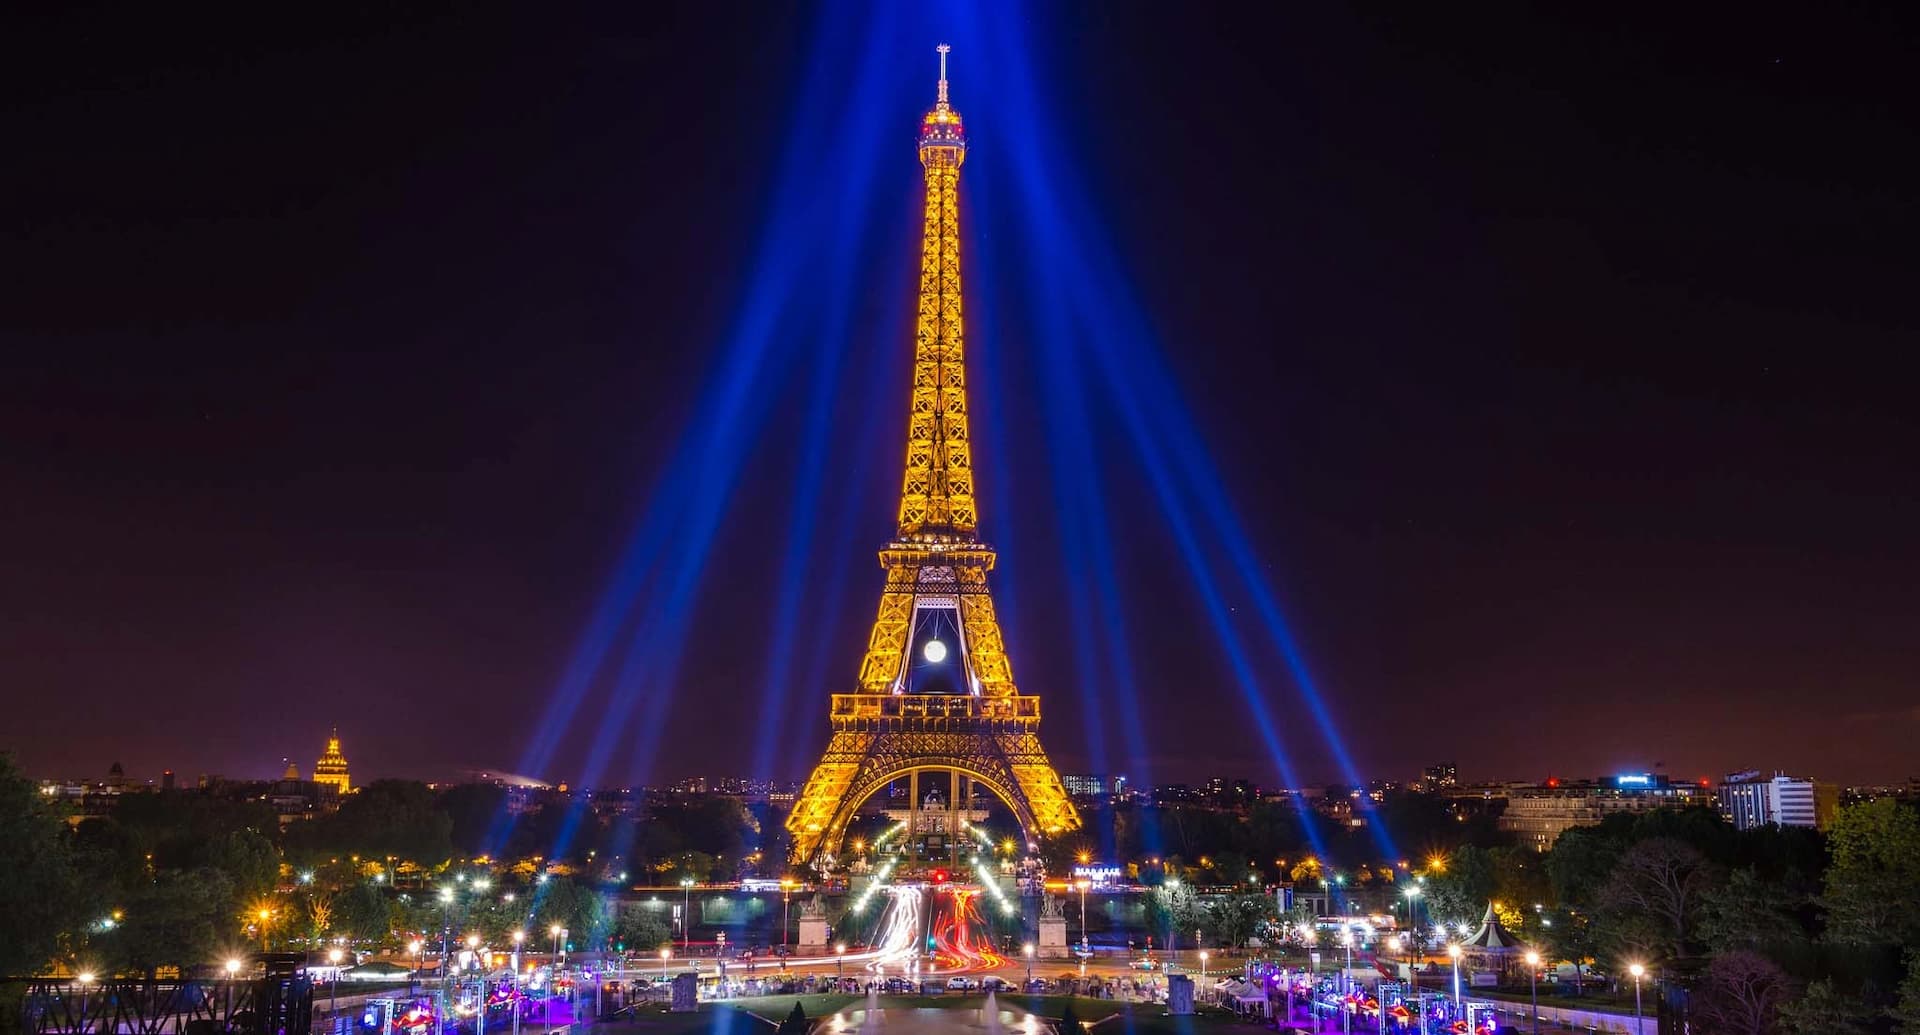 A nighttime view of the illuminated Eiffel Tower with blue light beams shining from its top